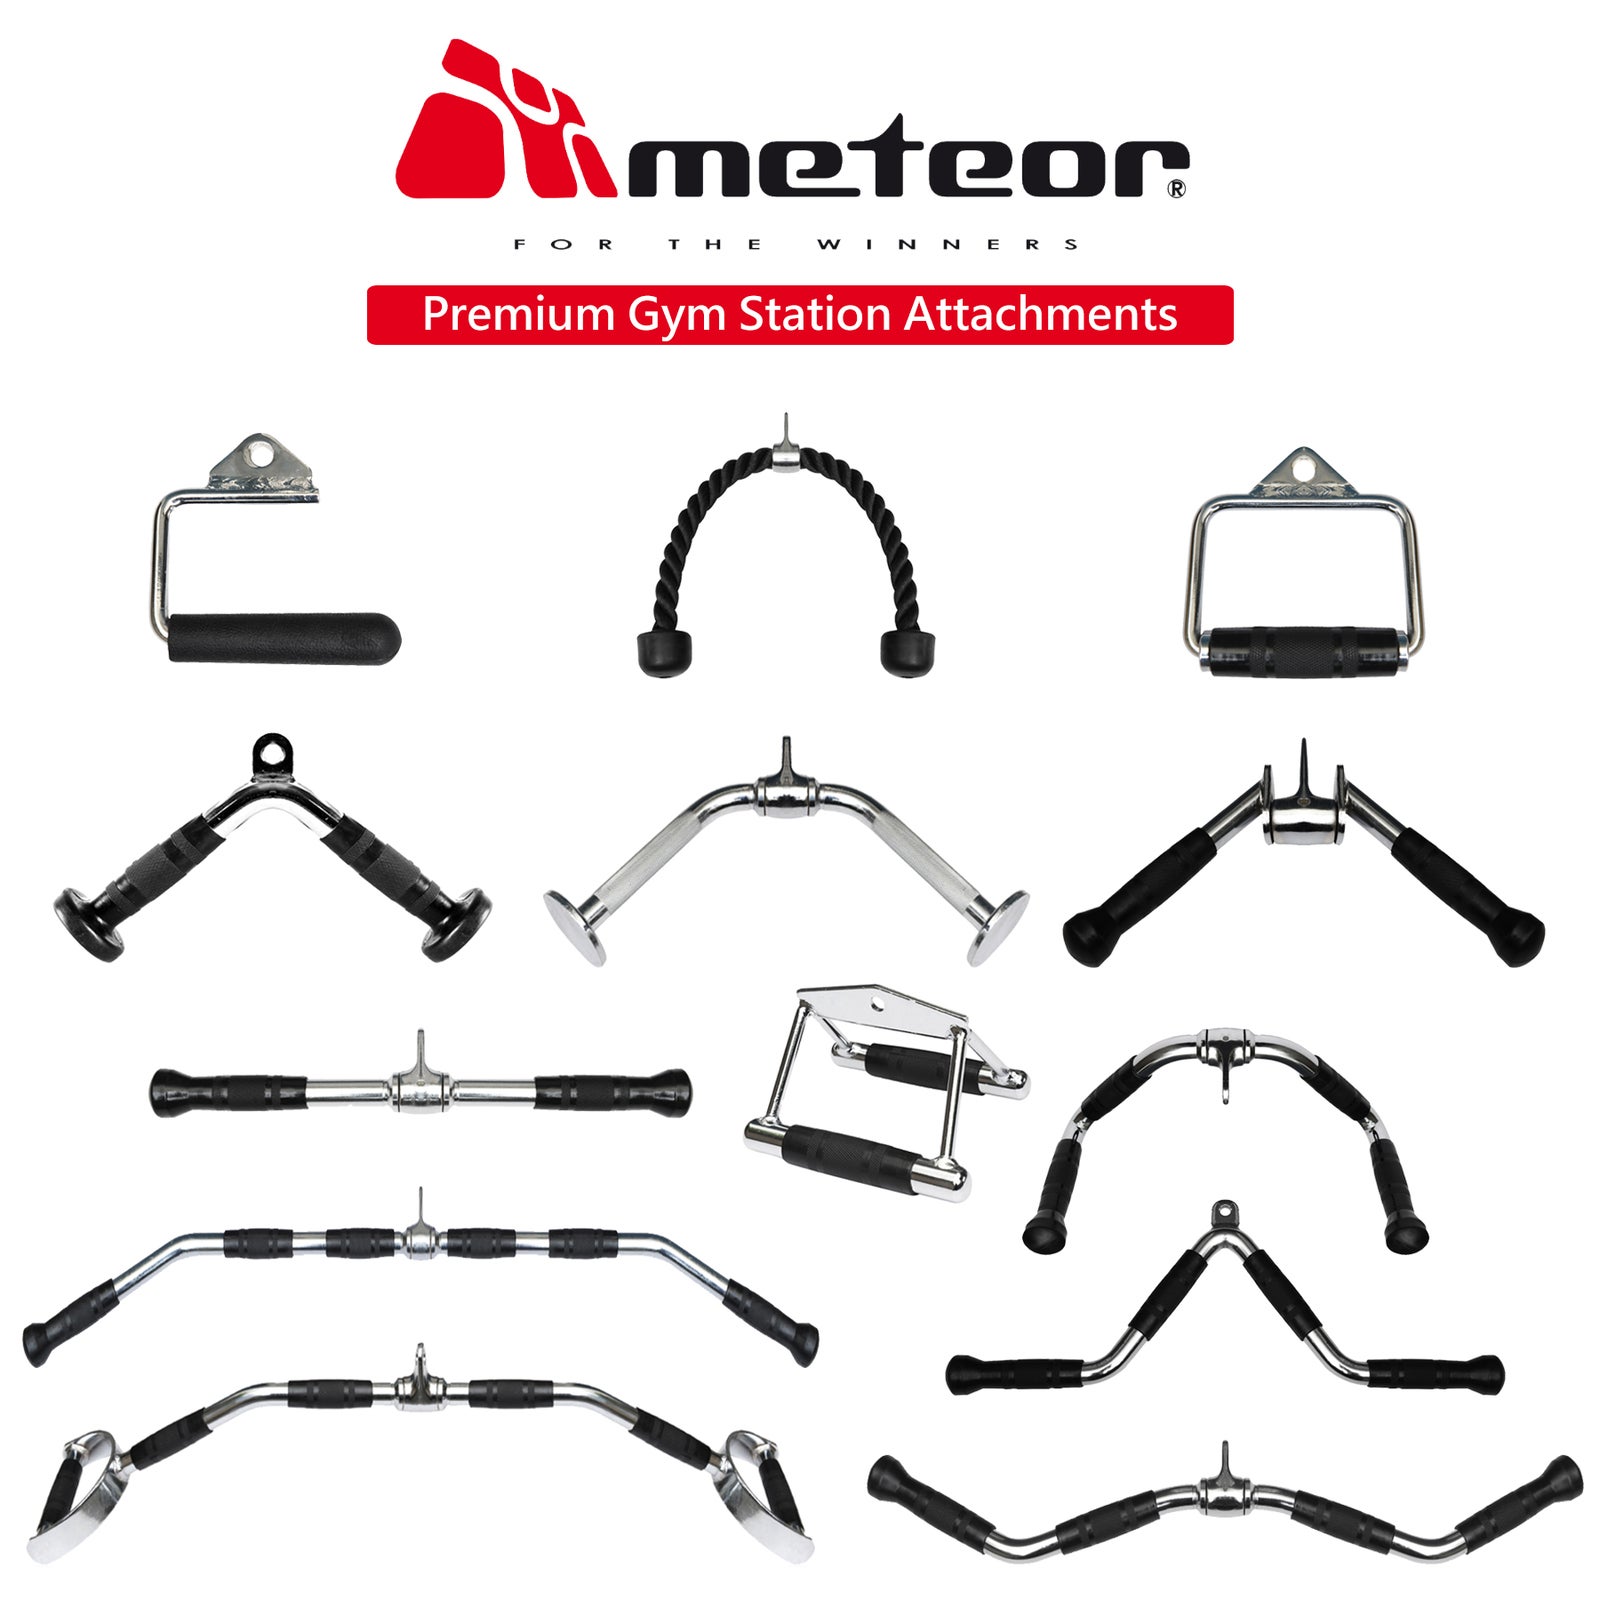 METEOR Essential Cable Pully Attachments,Exercise Machine Attachment,Gym Station Accessories